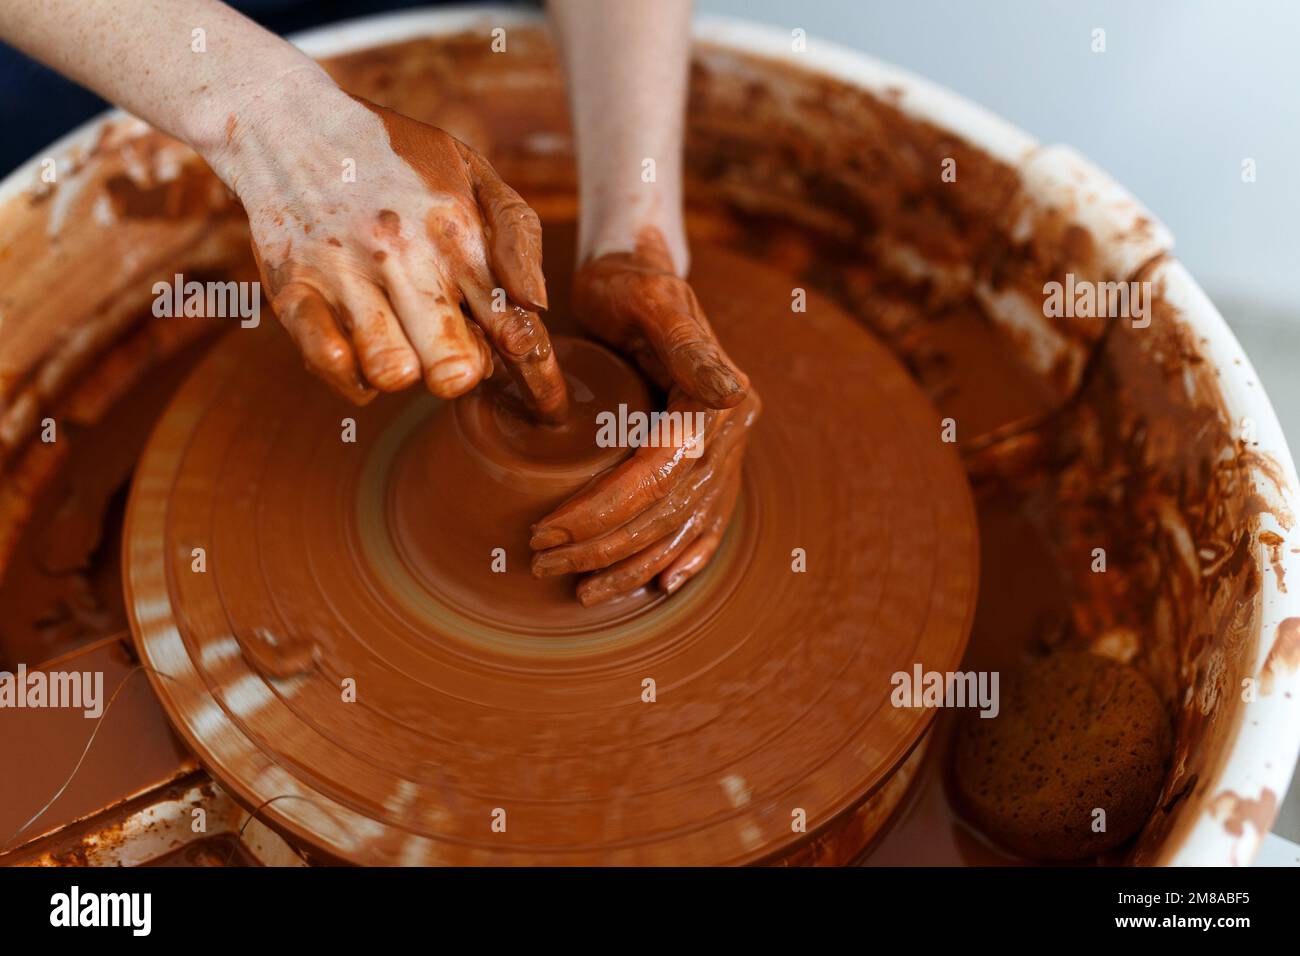 Cropped Image of Unrecognizable Female Ceramics Maker working with Pottery Wheel in Cozy Workshop Makes a Future Vase or Mug,Creative People Handcraft Stock Photo